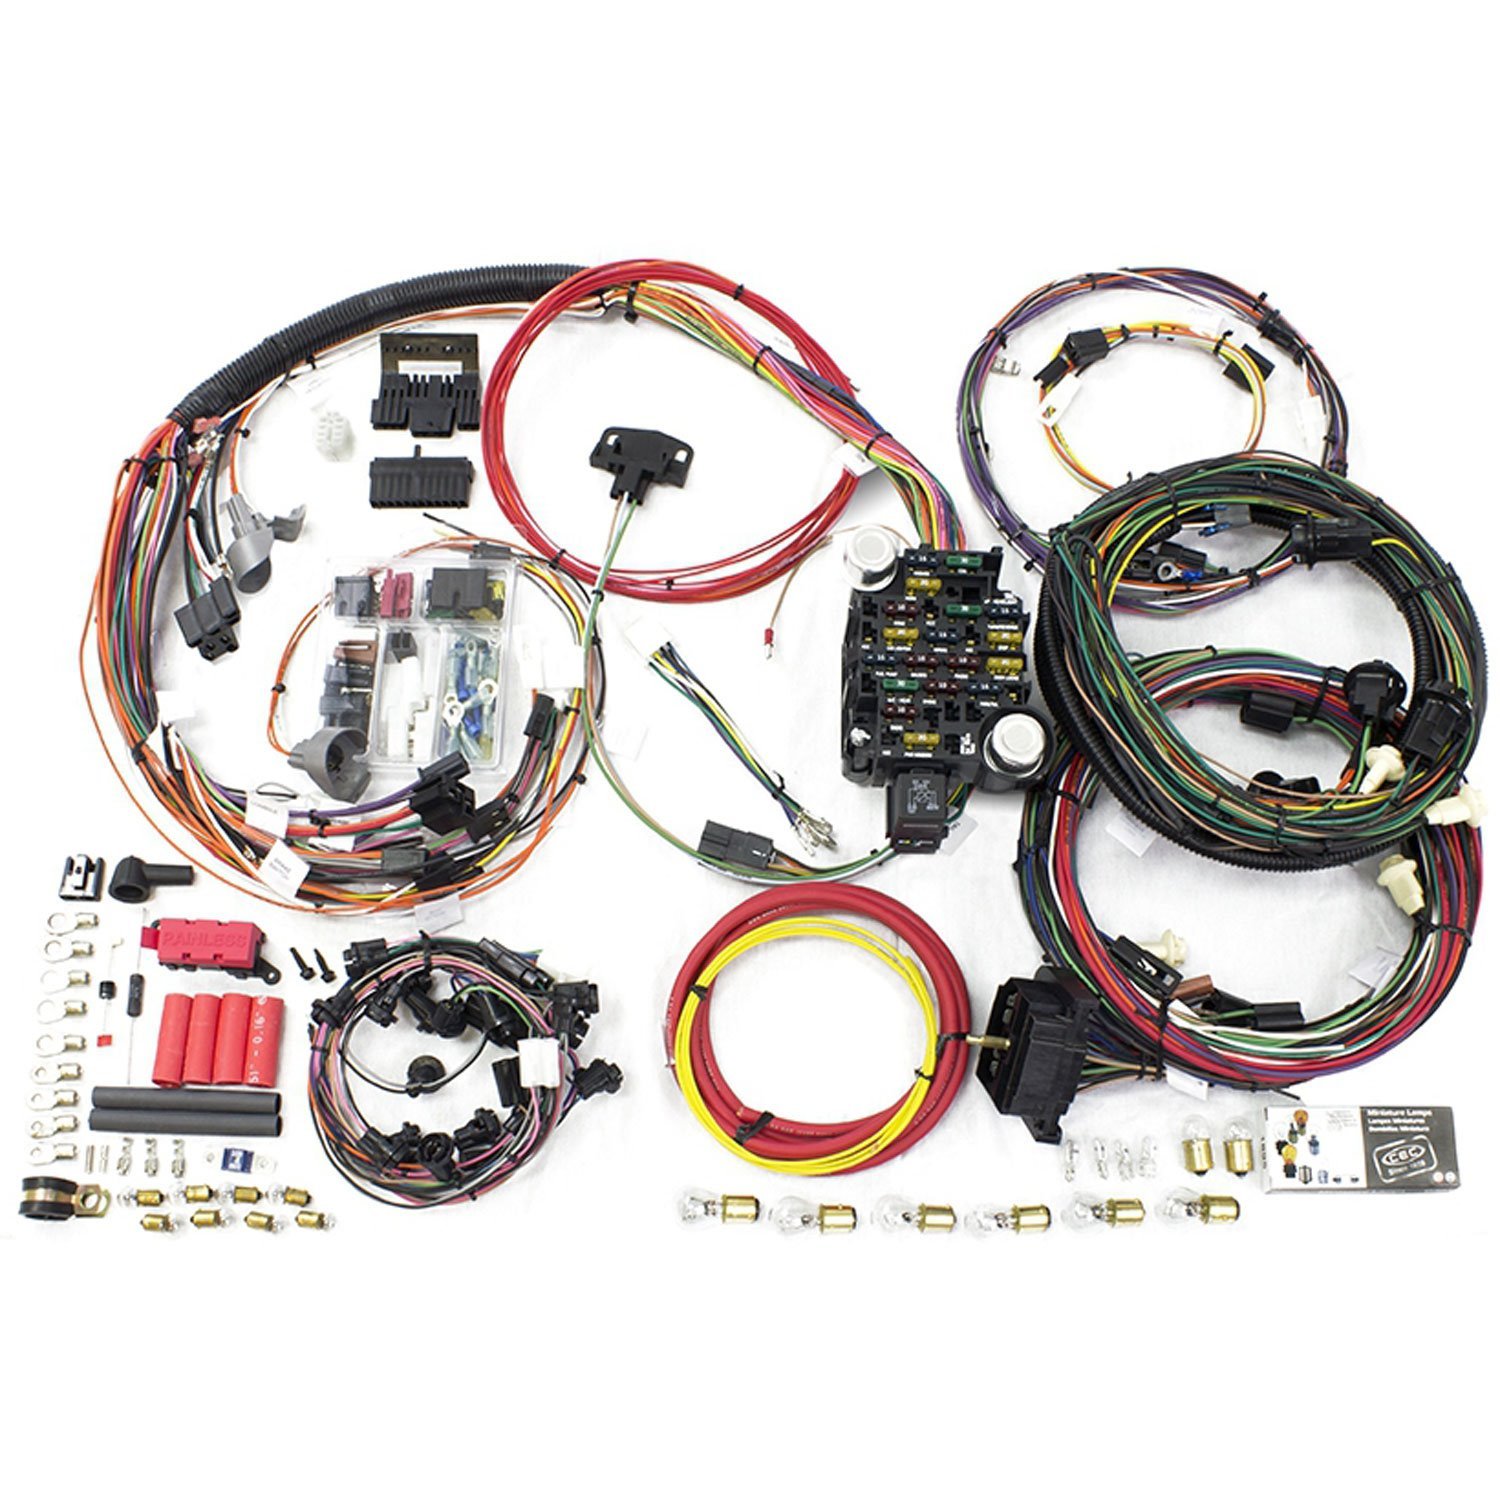 Direct Fit 26-Circuit Wire Harness for 1970-1972 Chevy Chevelle, Malibu